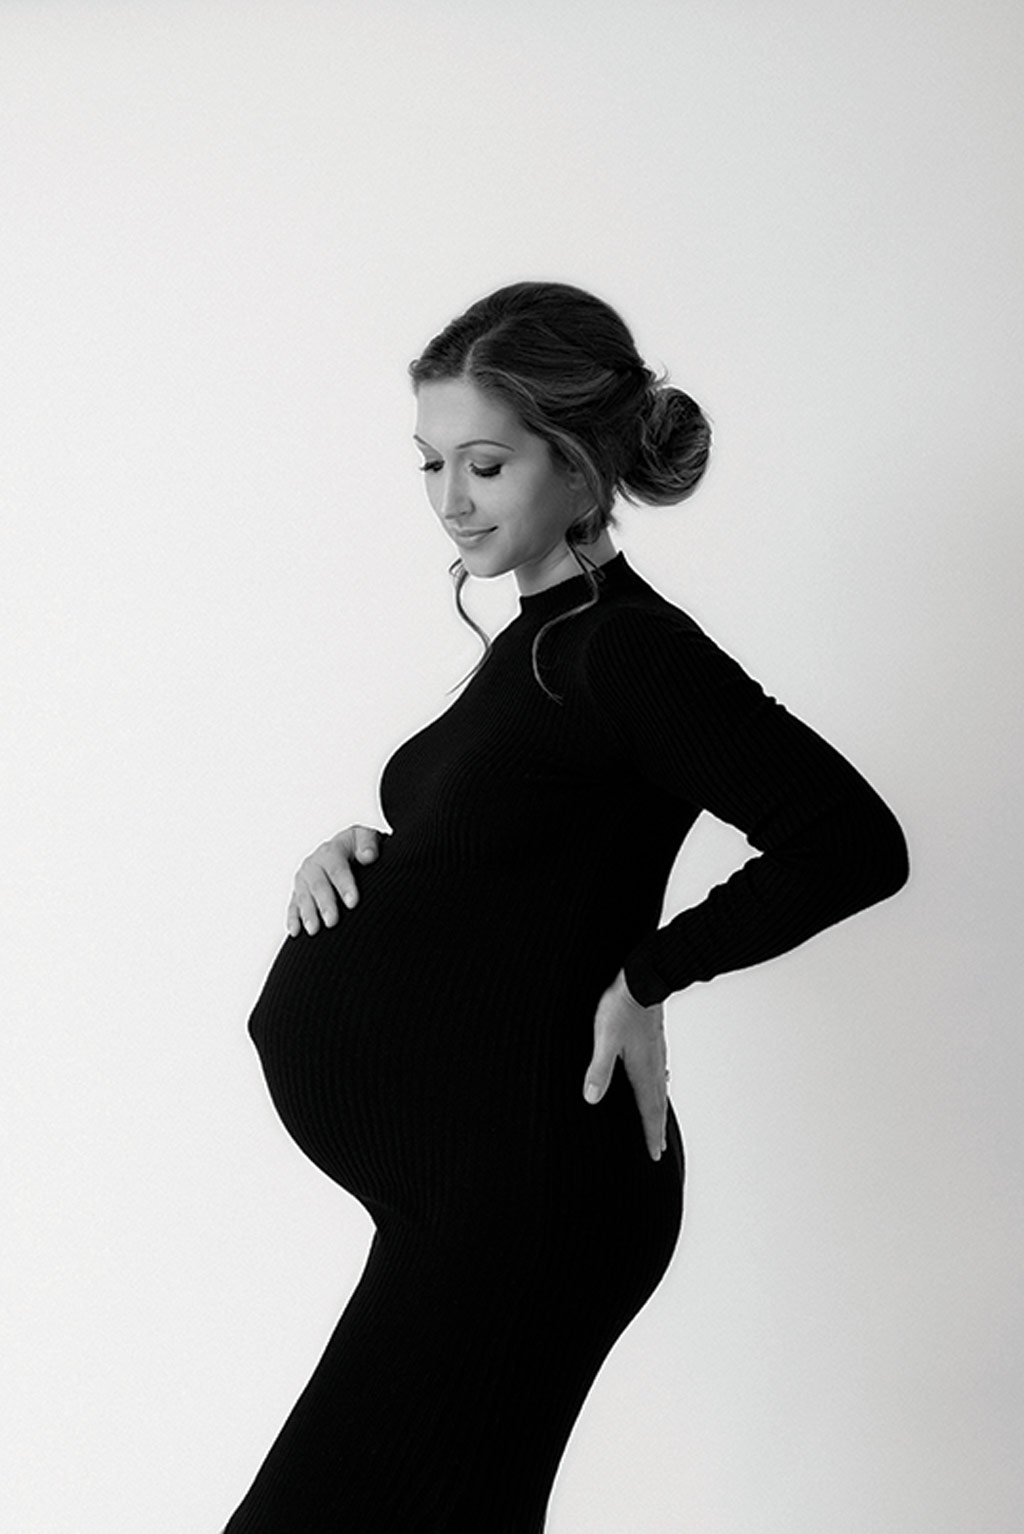 Maternity photography – your complete guide - Amateur Photographer